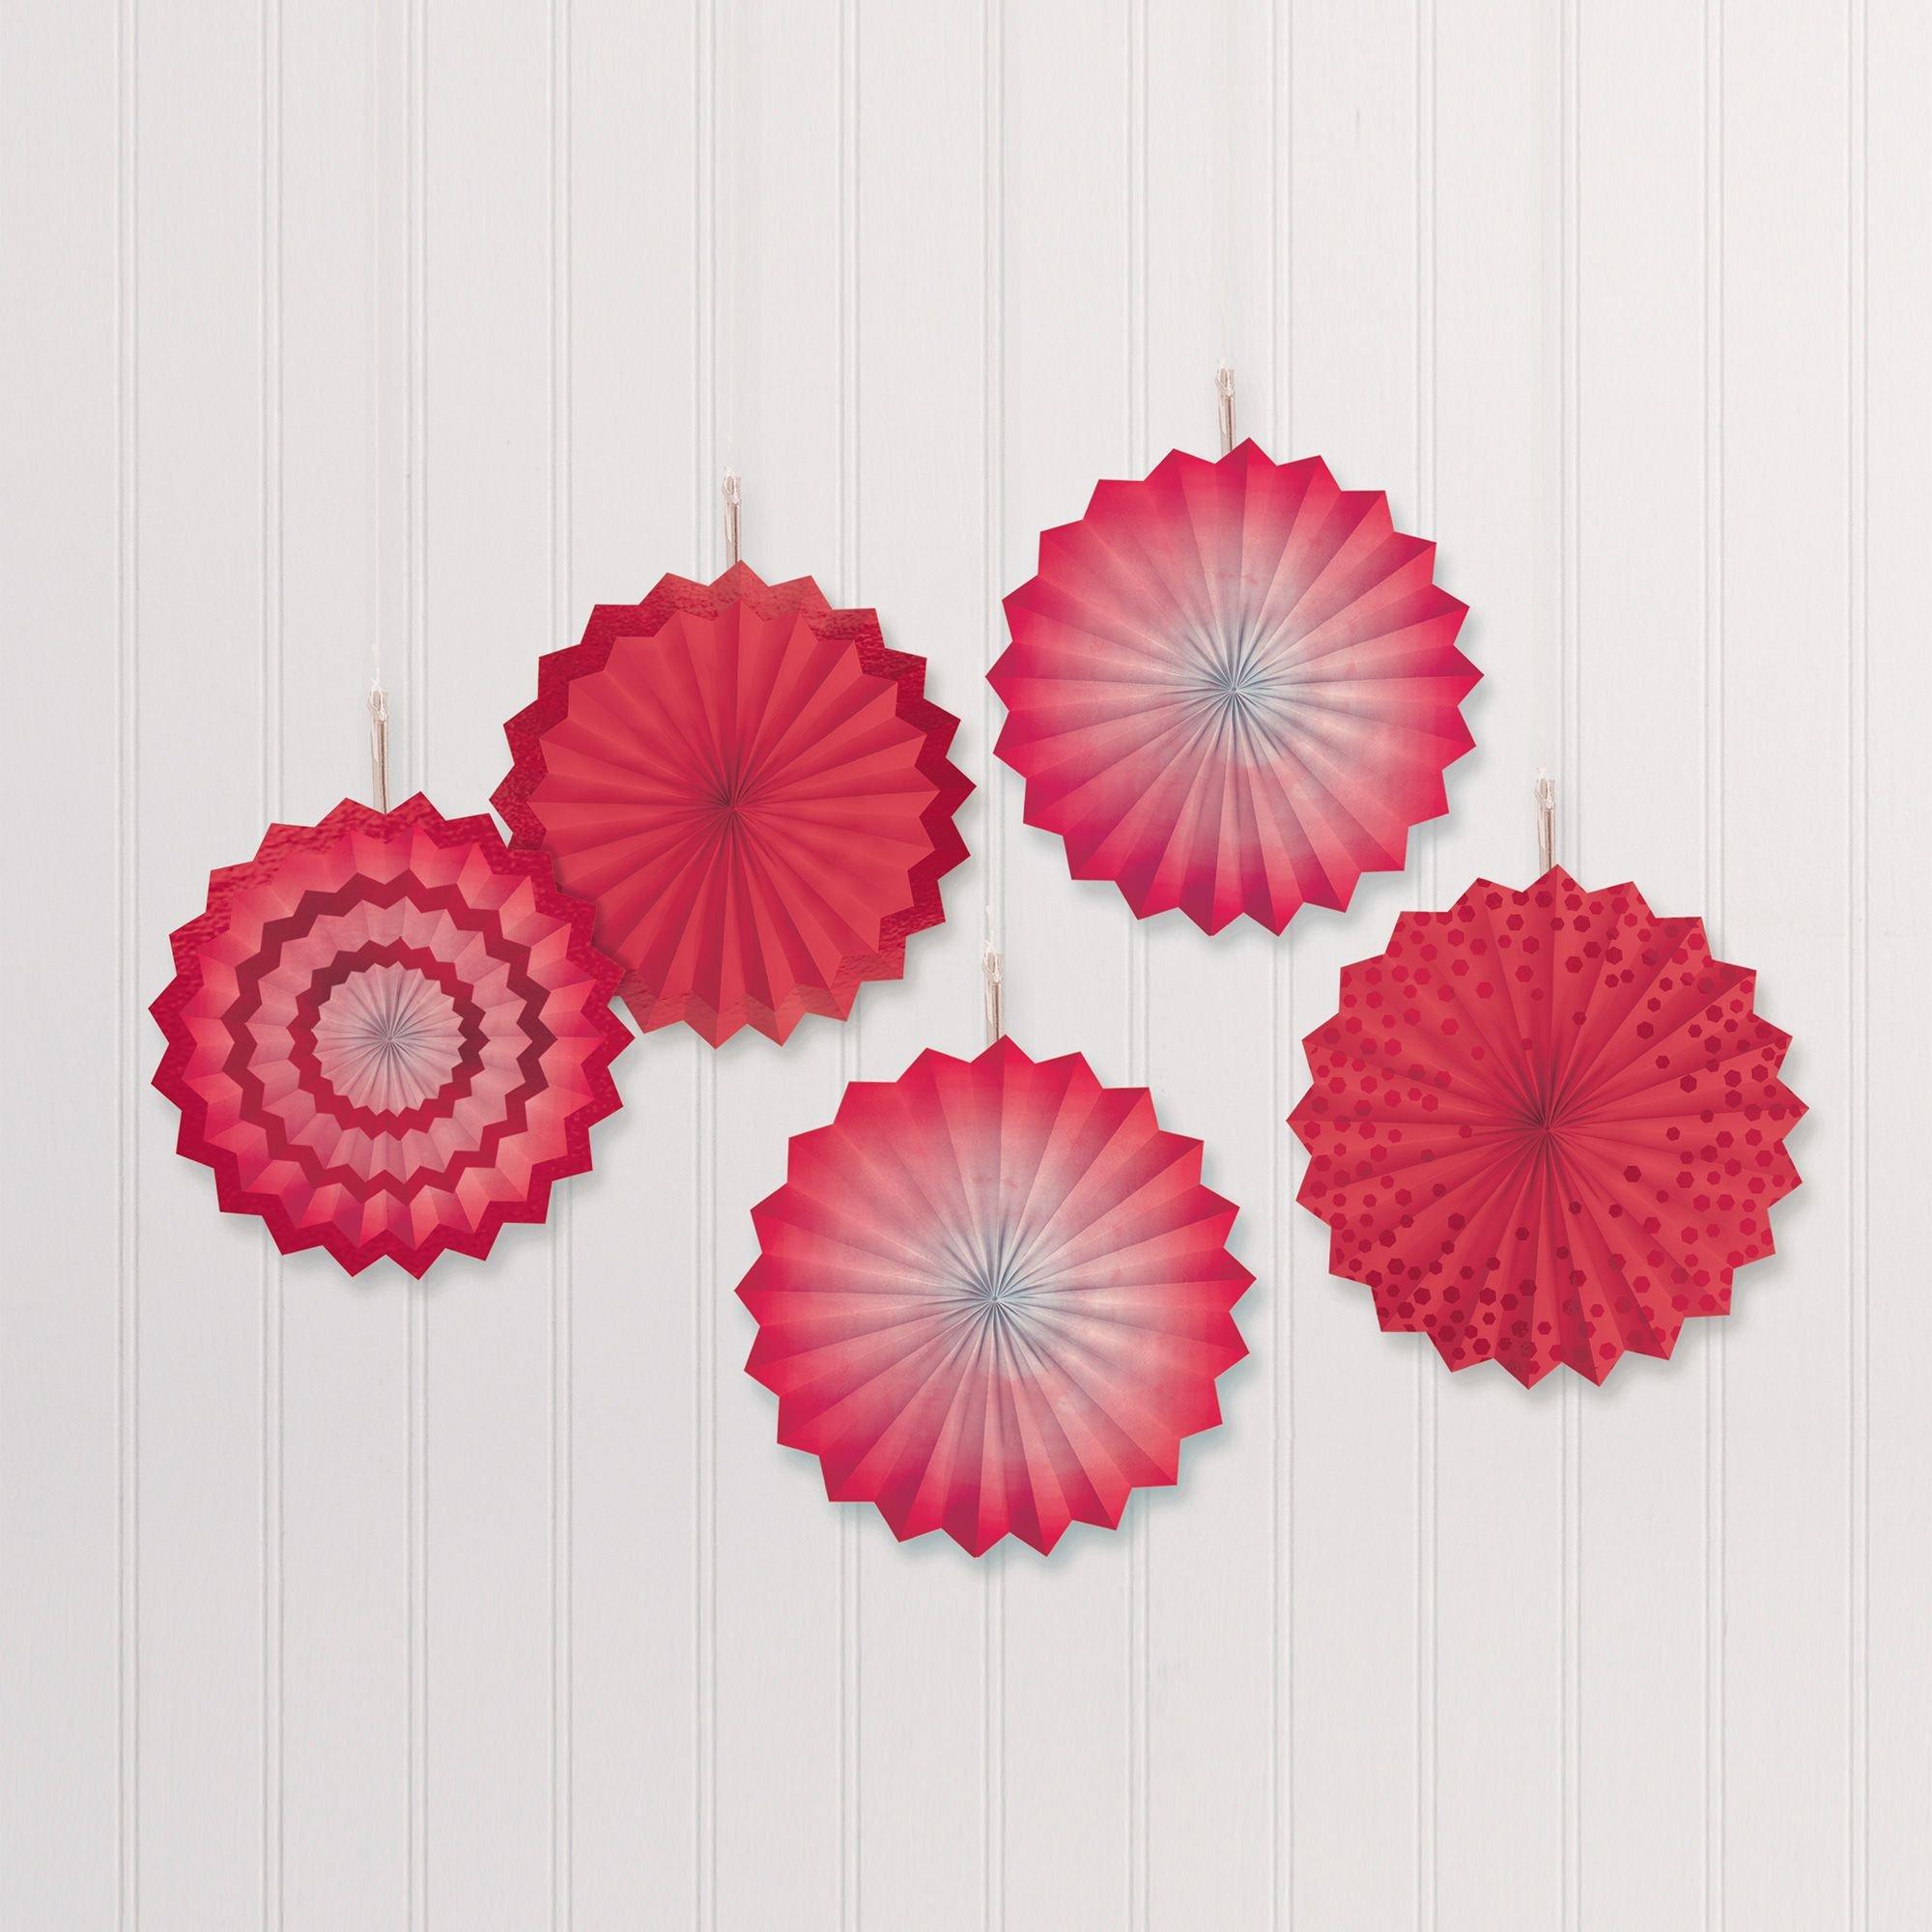 Set of 6 Red Hanging Paper Fan Decorations, Pinwheel Wall Backdrop Party Kit 8, 12, 16 by Efavormart